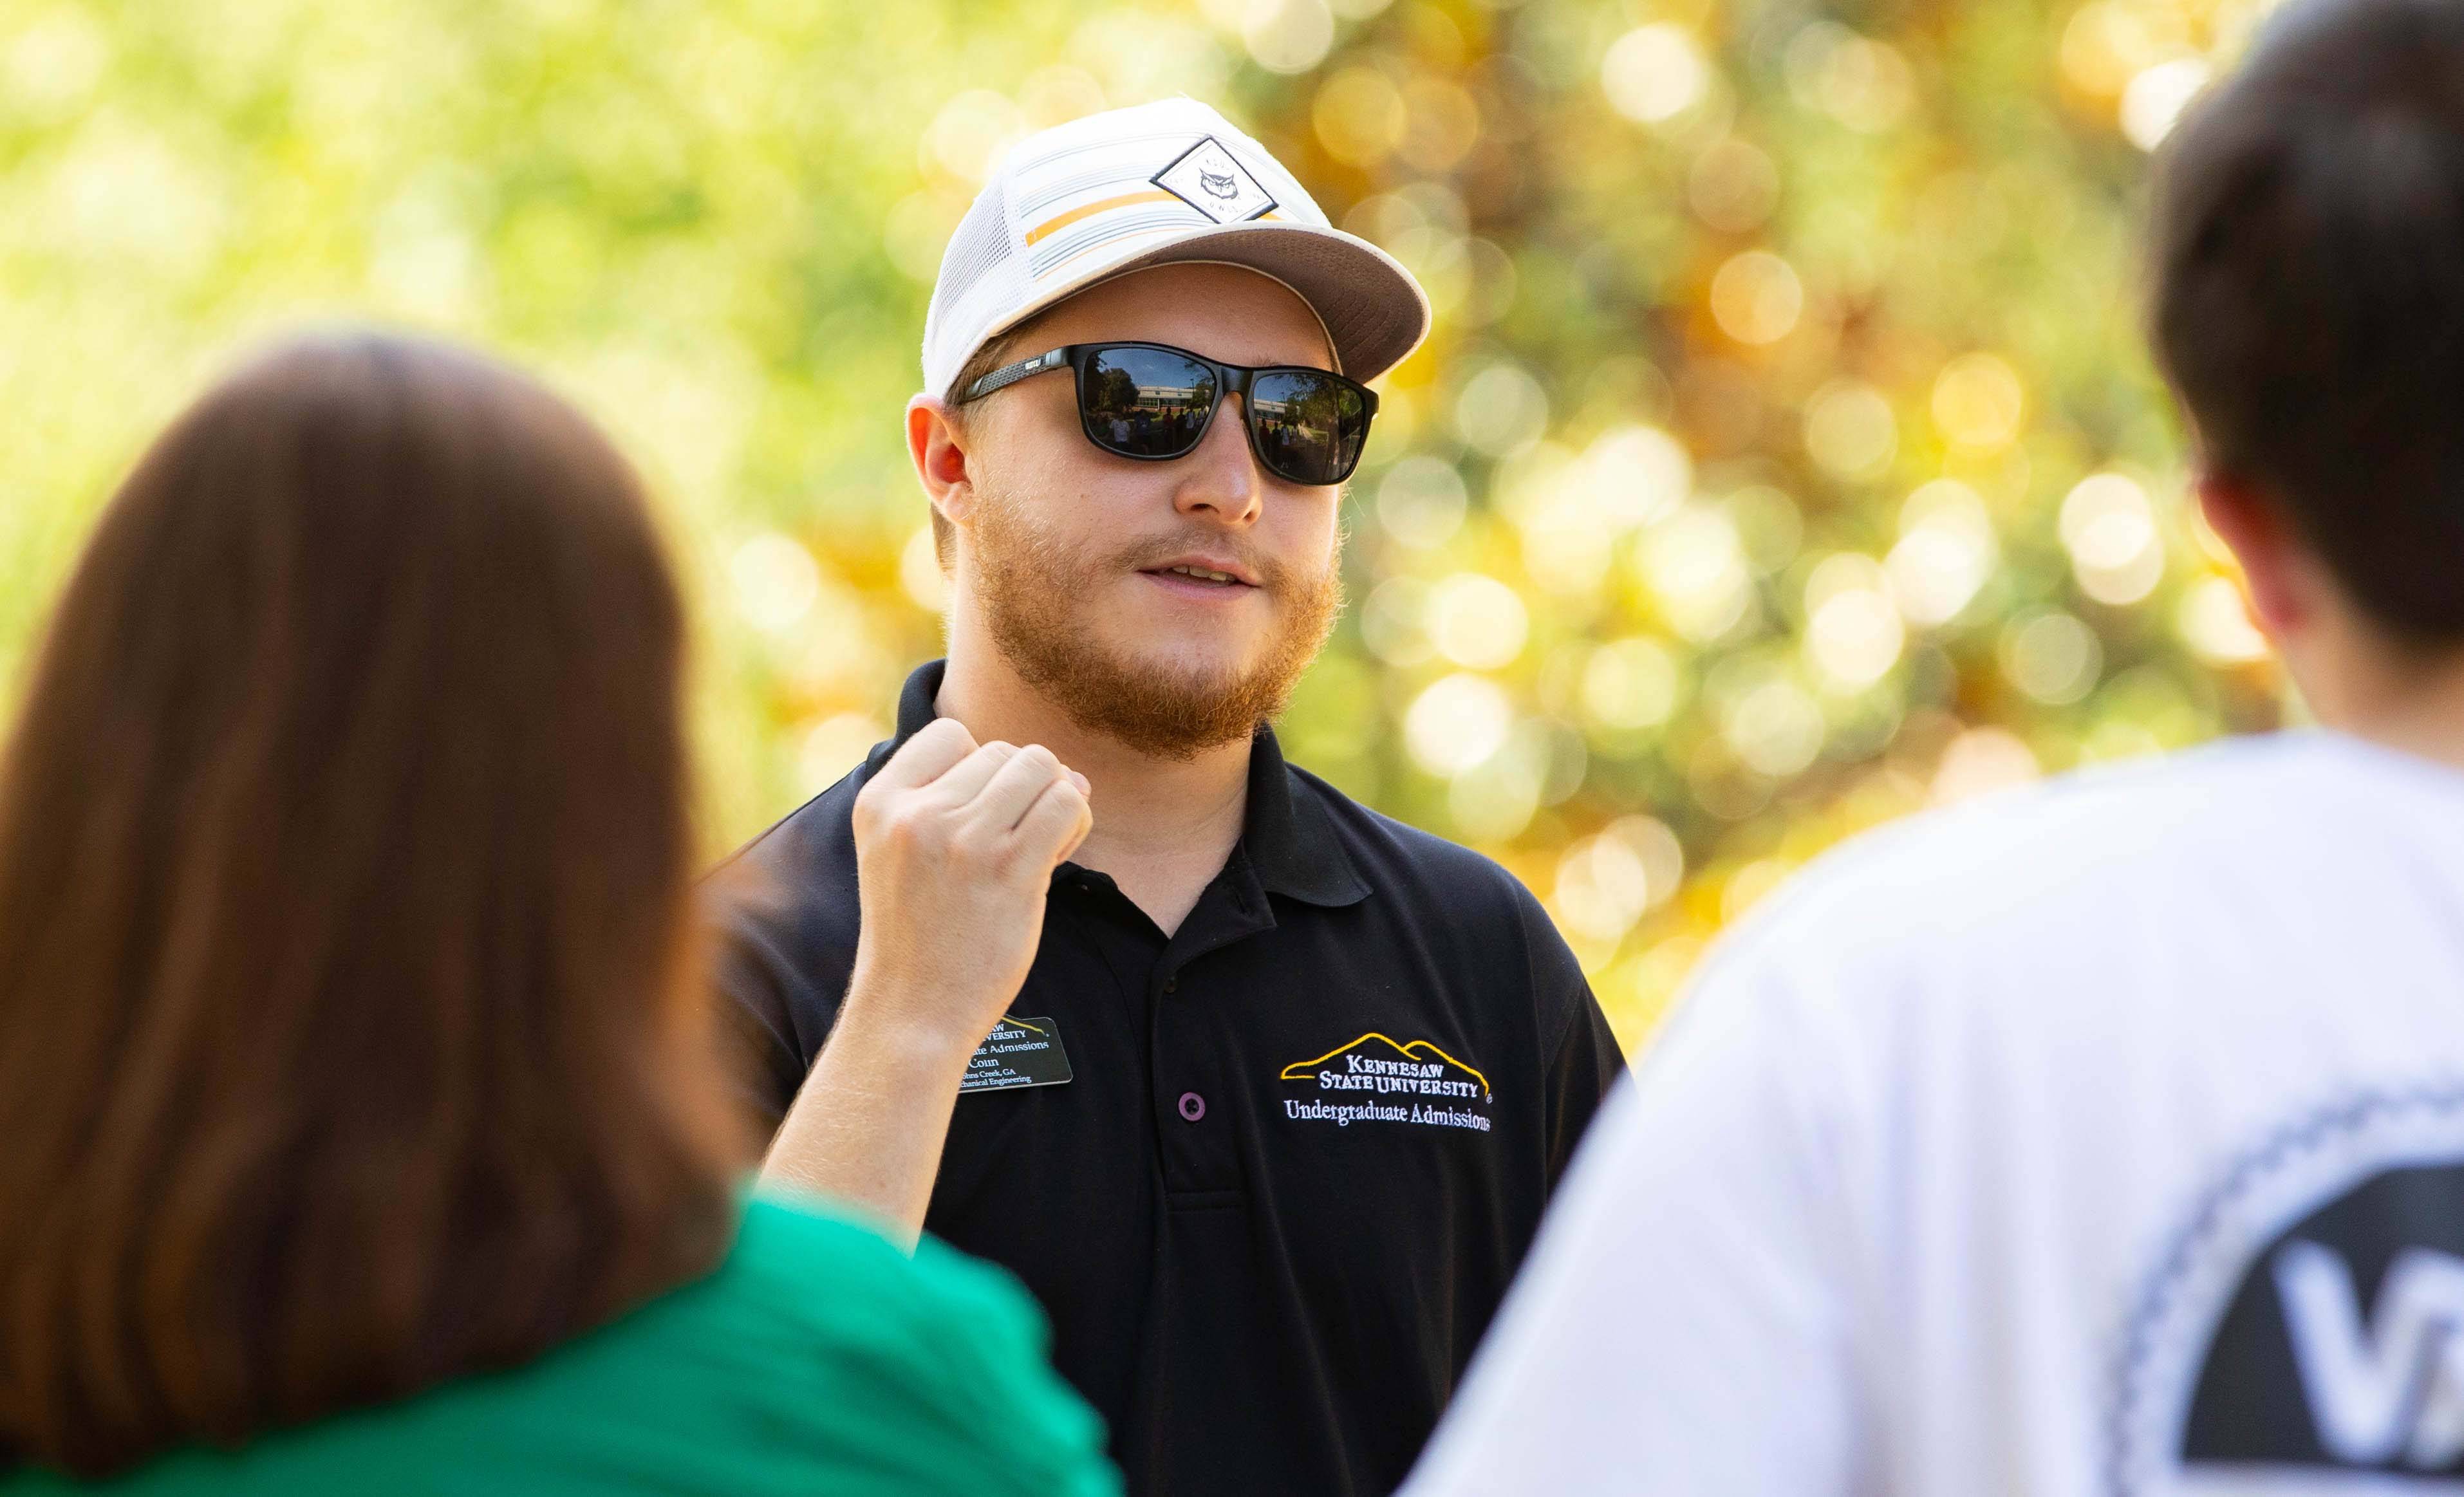 Colin Lucas is a tour guide for Kennesaw State